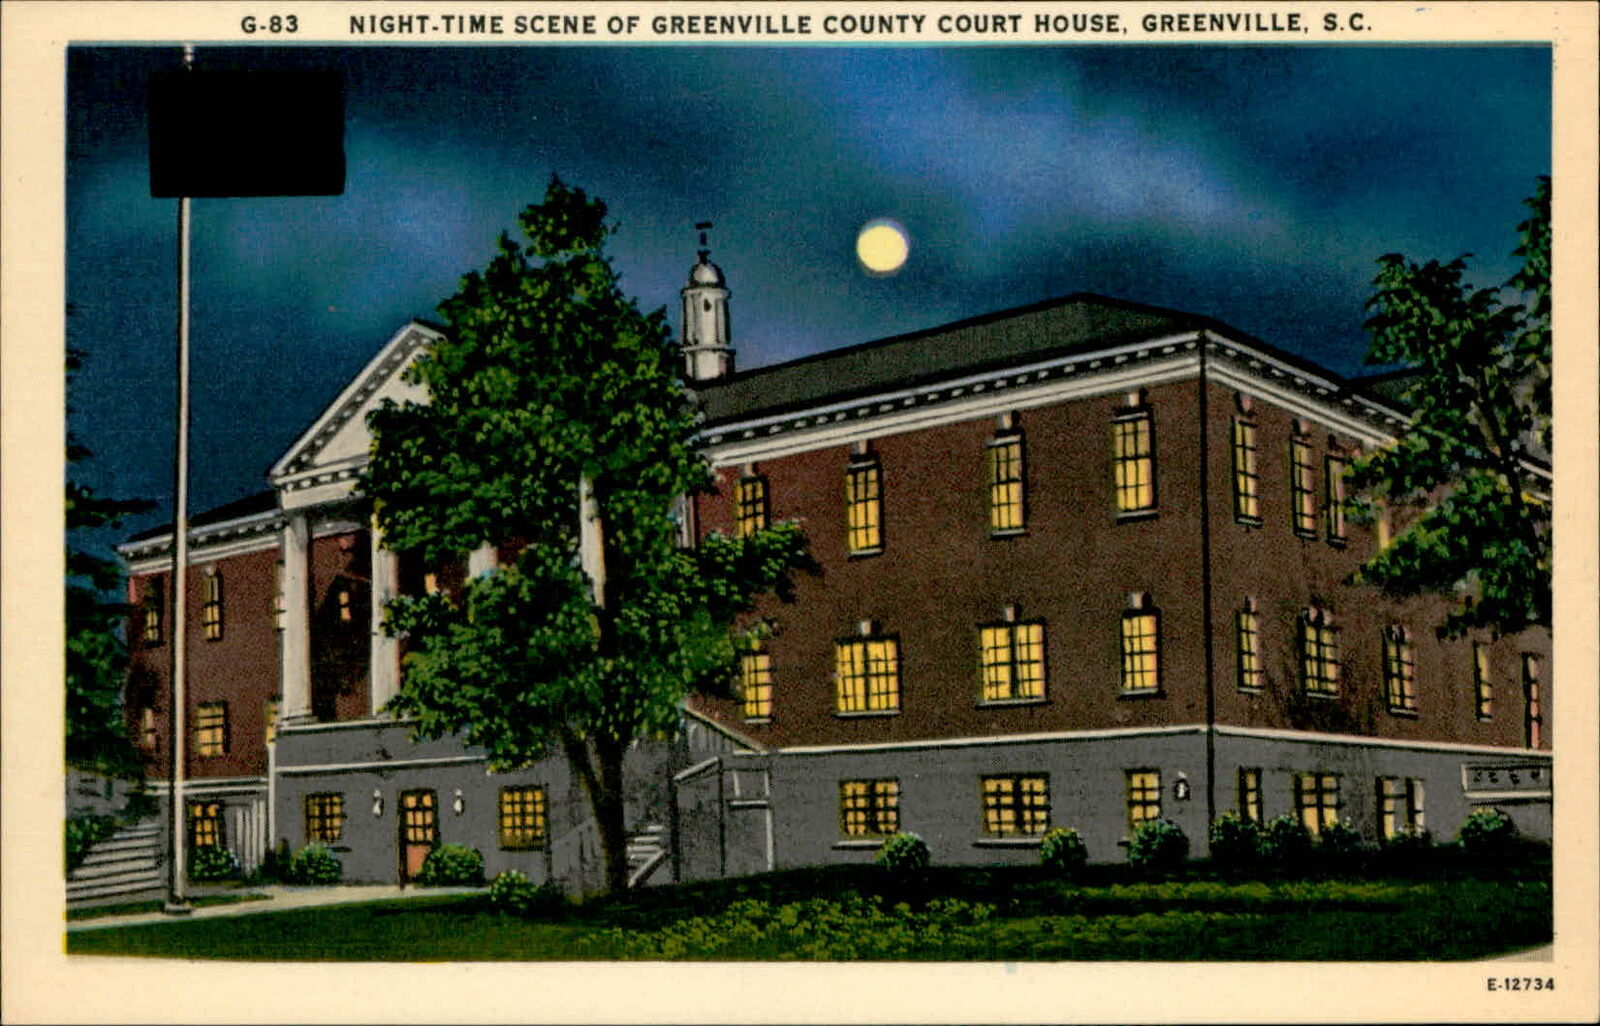 Postcard: EE G-83 NIGHT-TIME SCENE OF GREENVILLE COUNTY COURT HOUSE, G